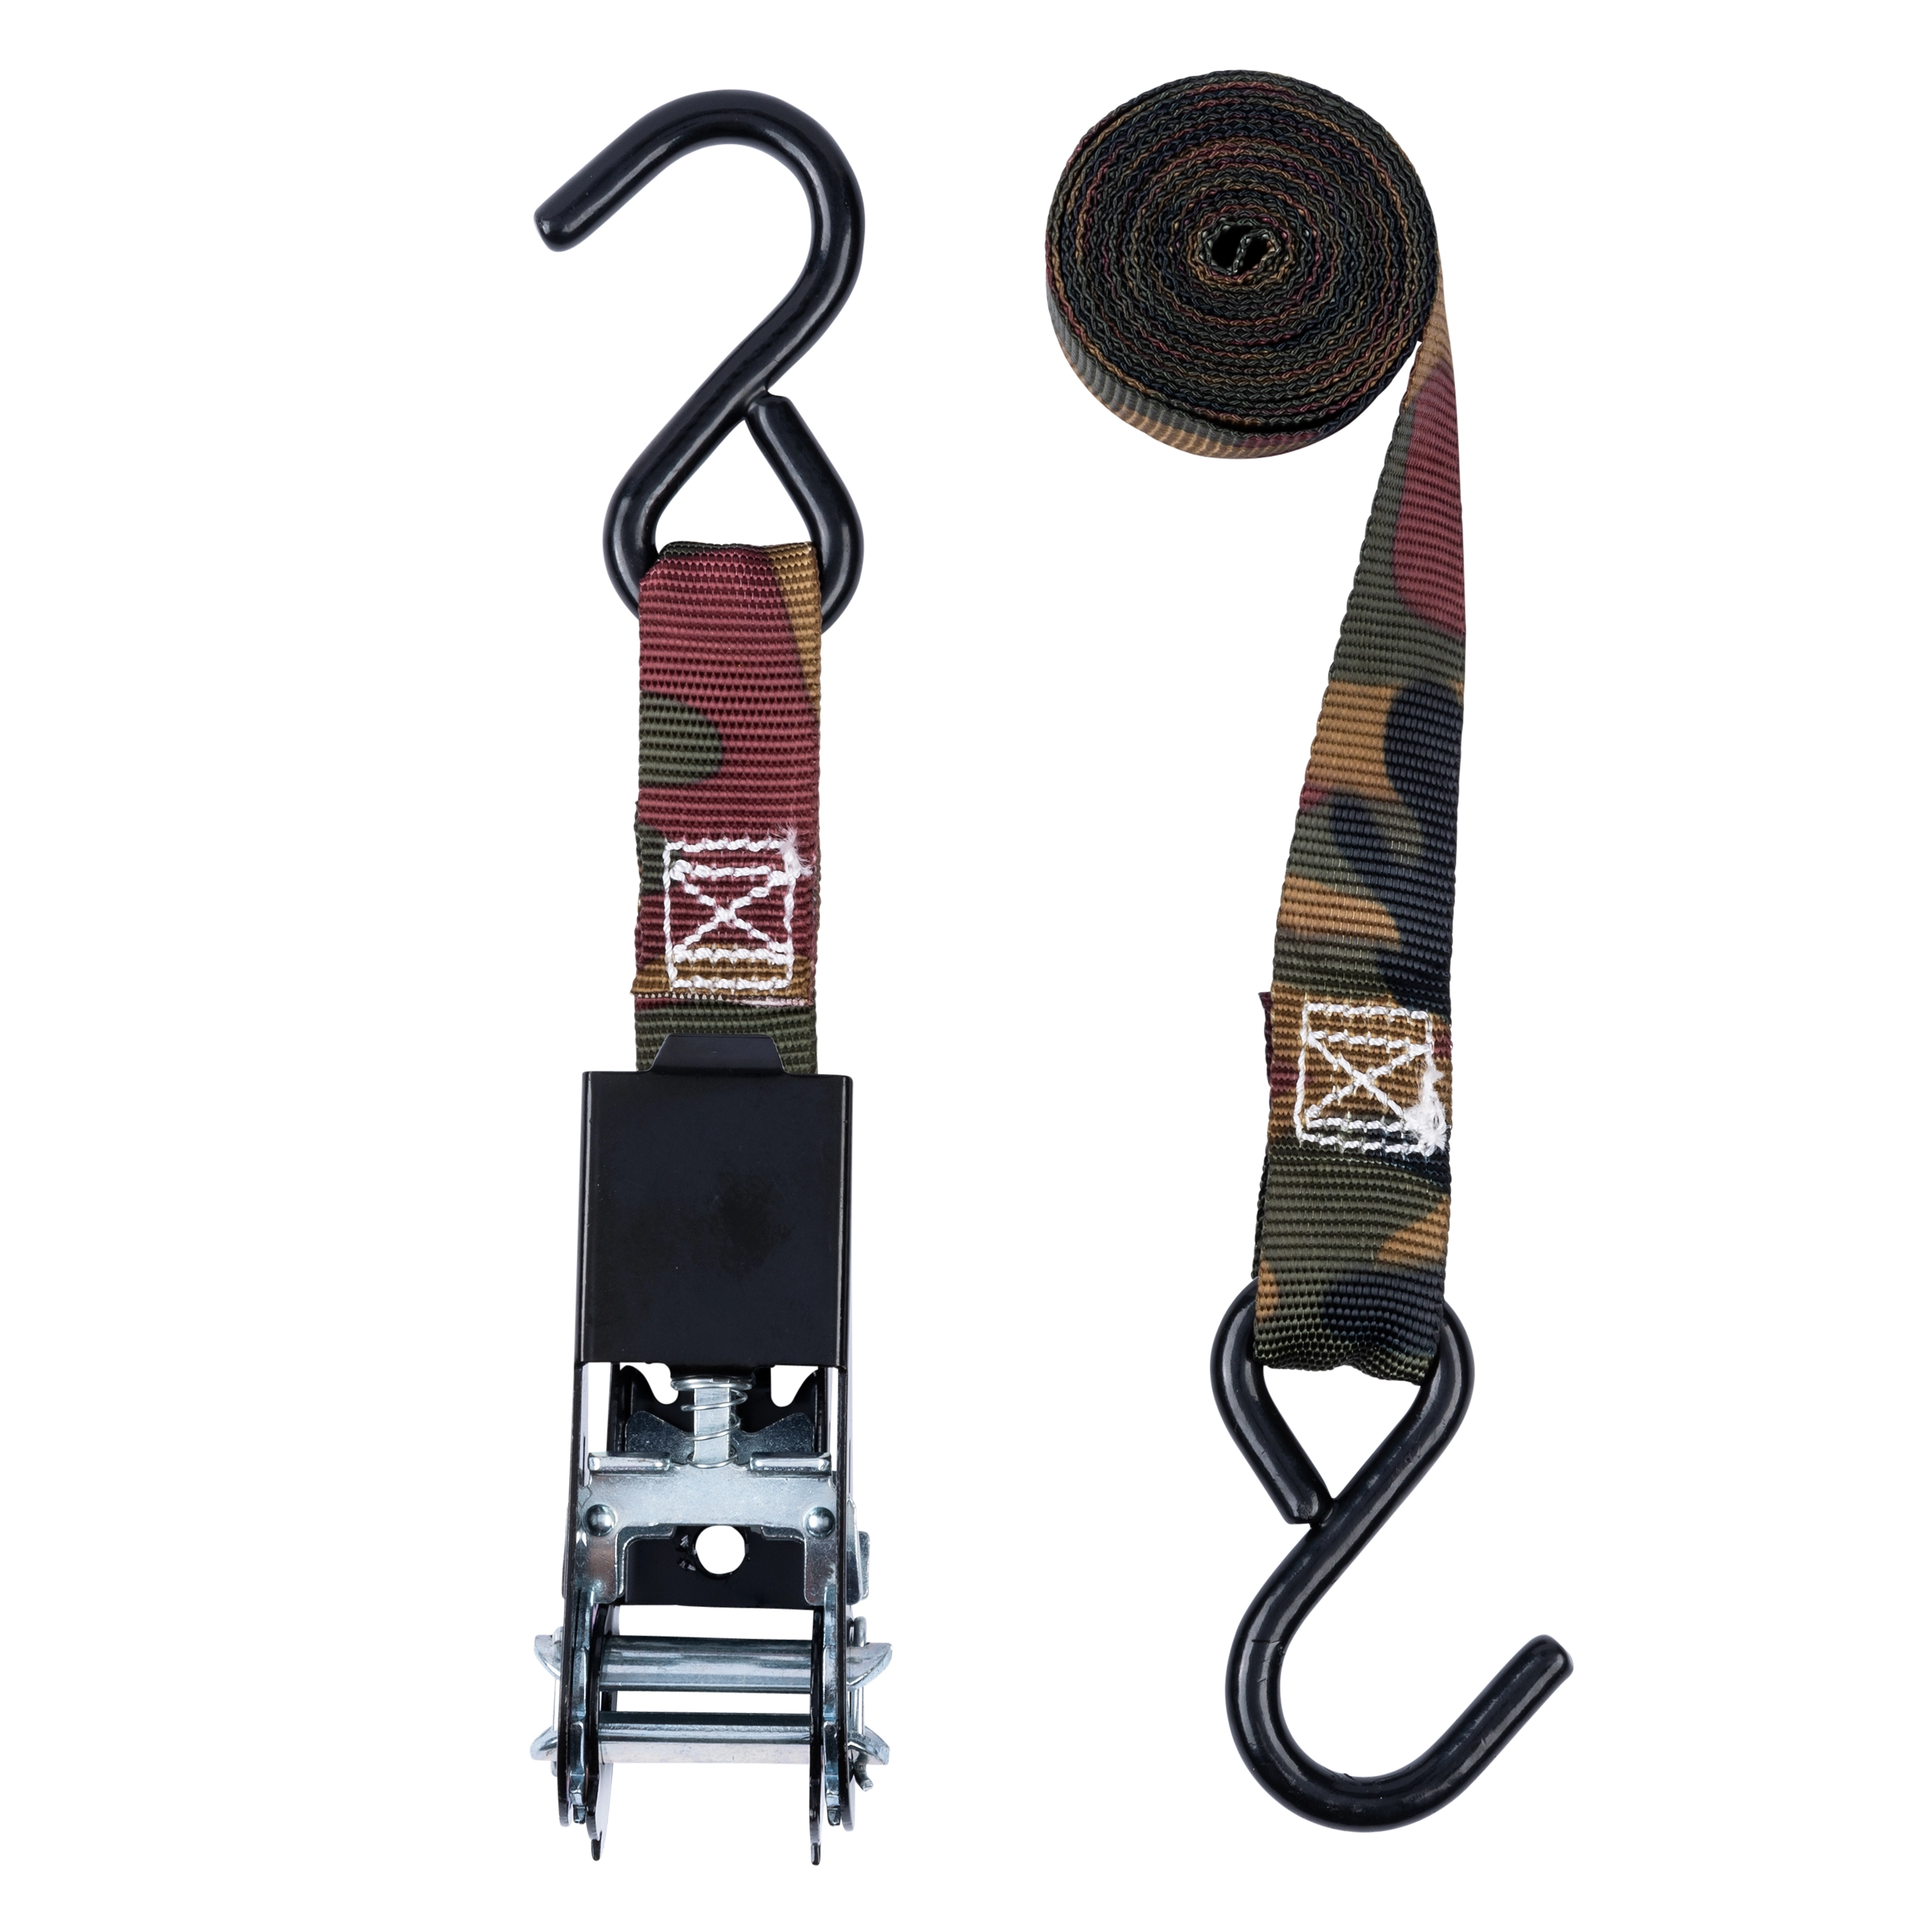 1" x 8' Ratchet Tie-Down, 400 lbs. WLL variant image view